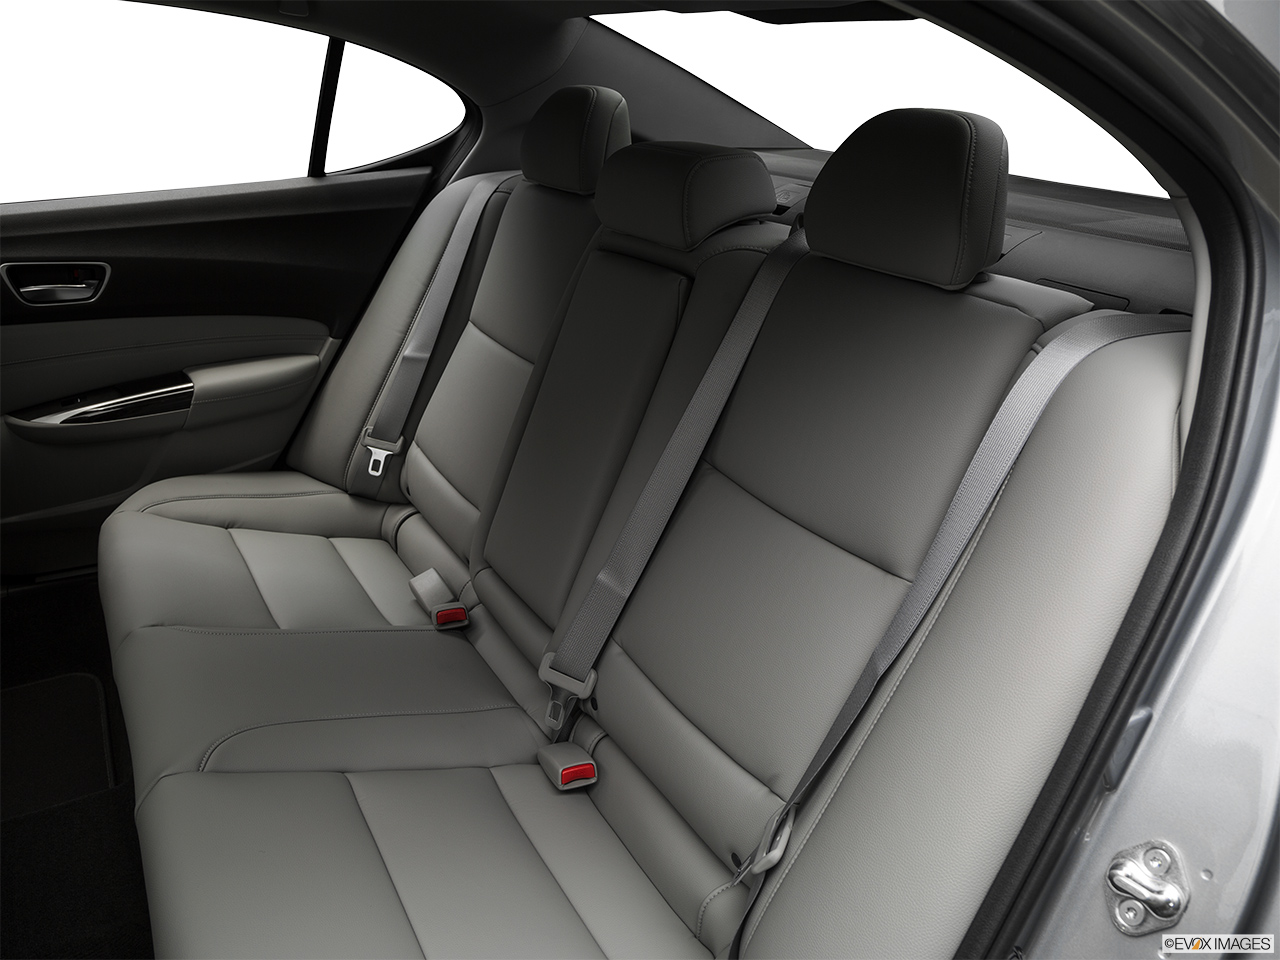 2020 Acura TLX 2.4 8-DCT P-AWS Rear seats from Drivers Side. 